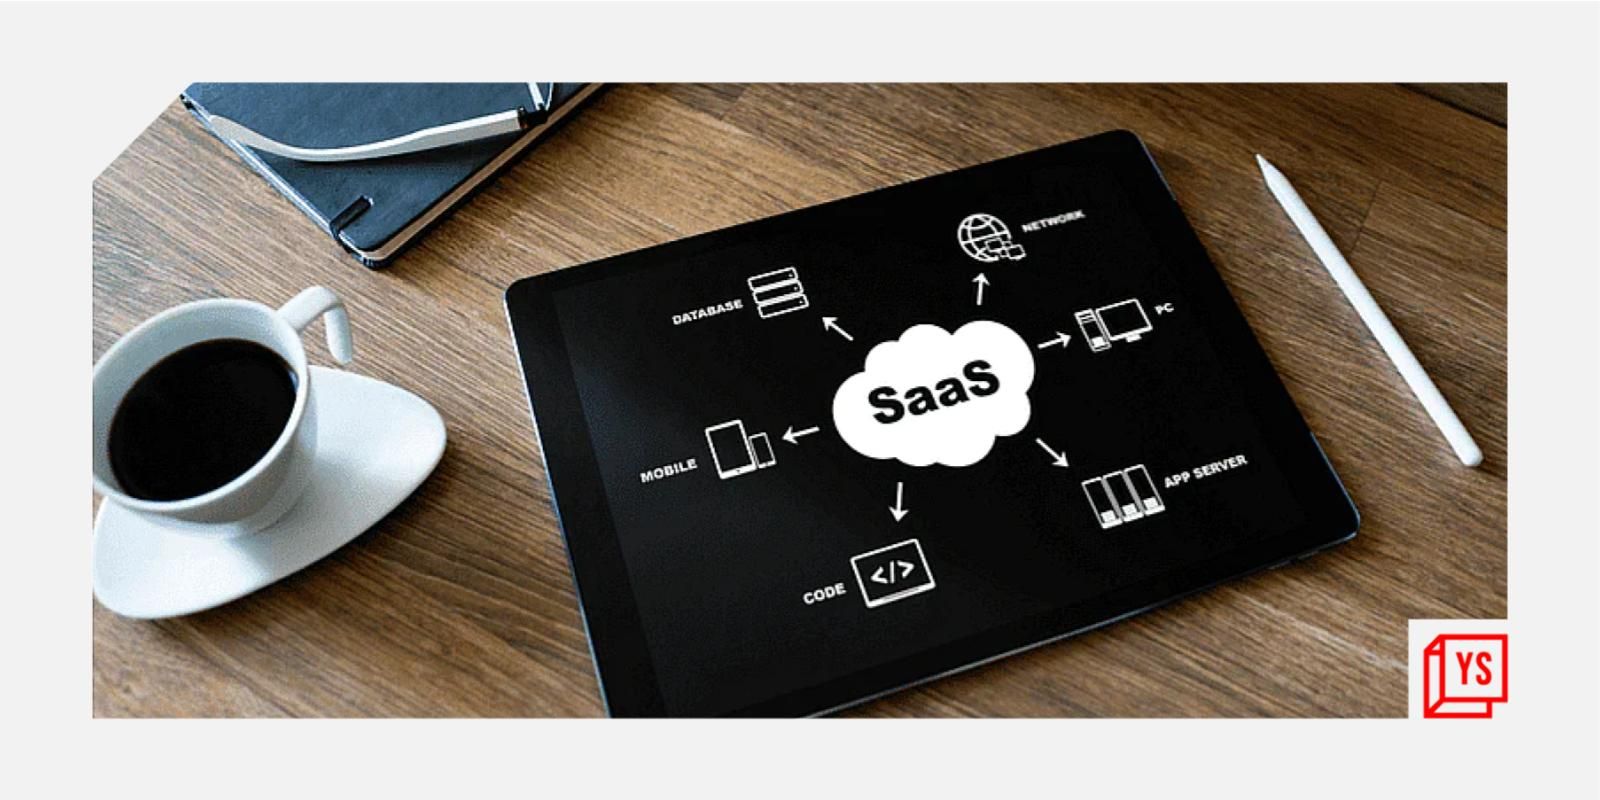 Chennai-based startups that are reimagining the SaaS industry